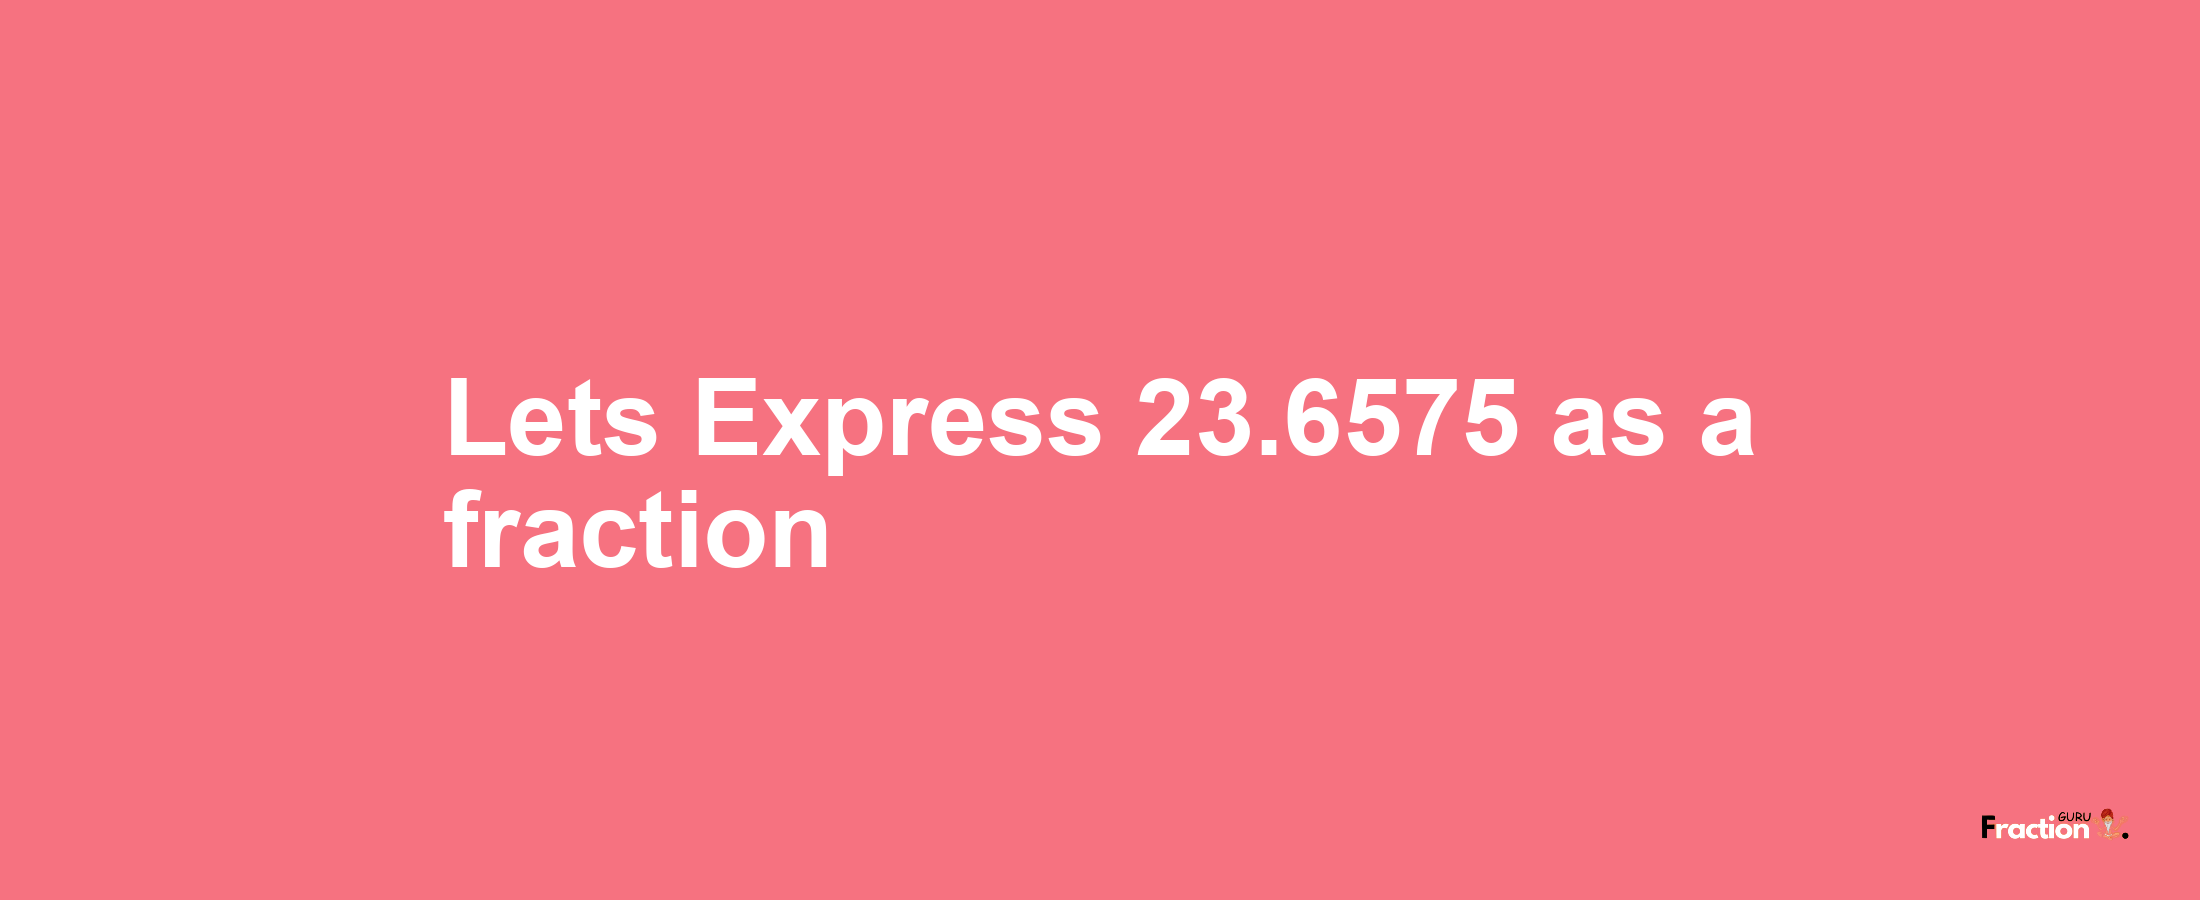 Lets Express 23.6575 as afraction